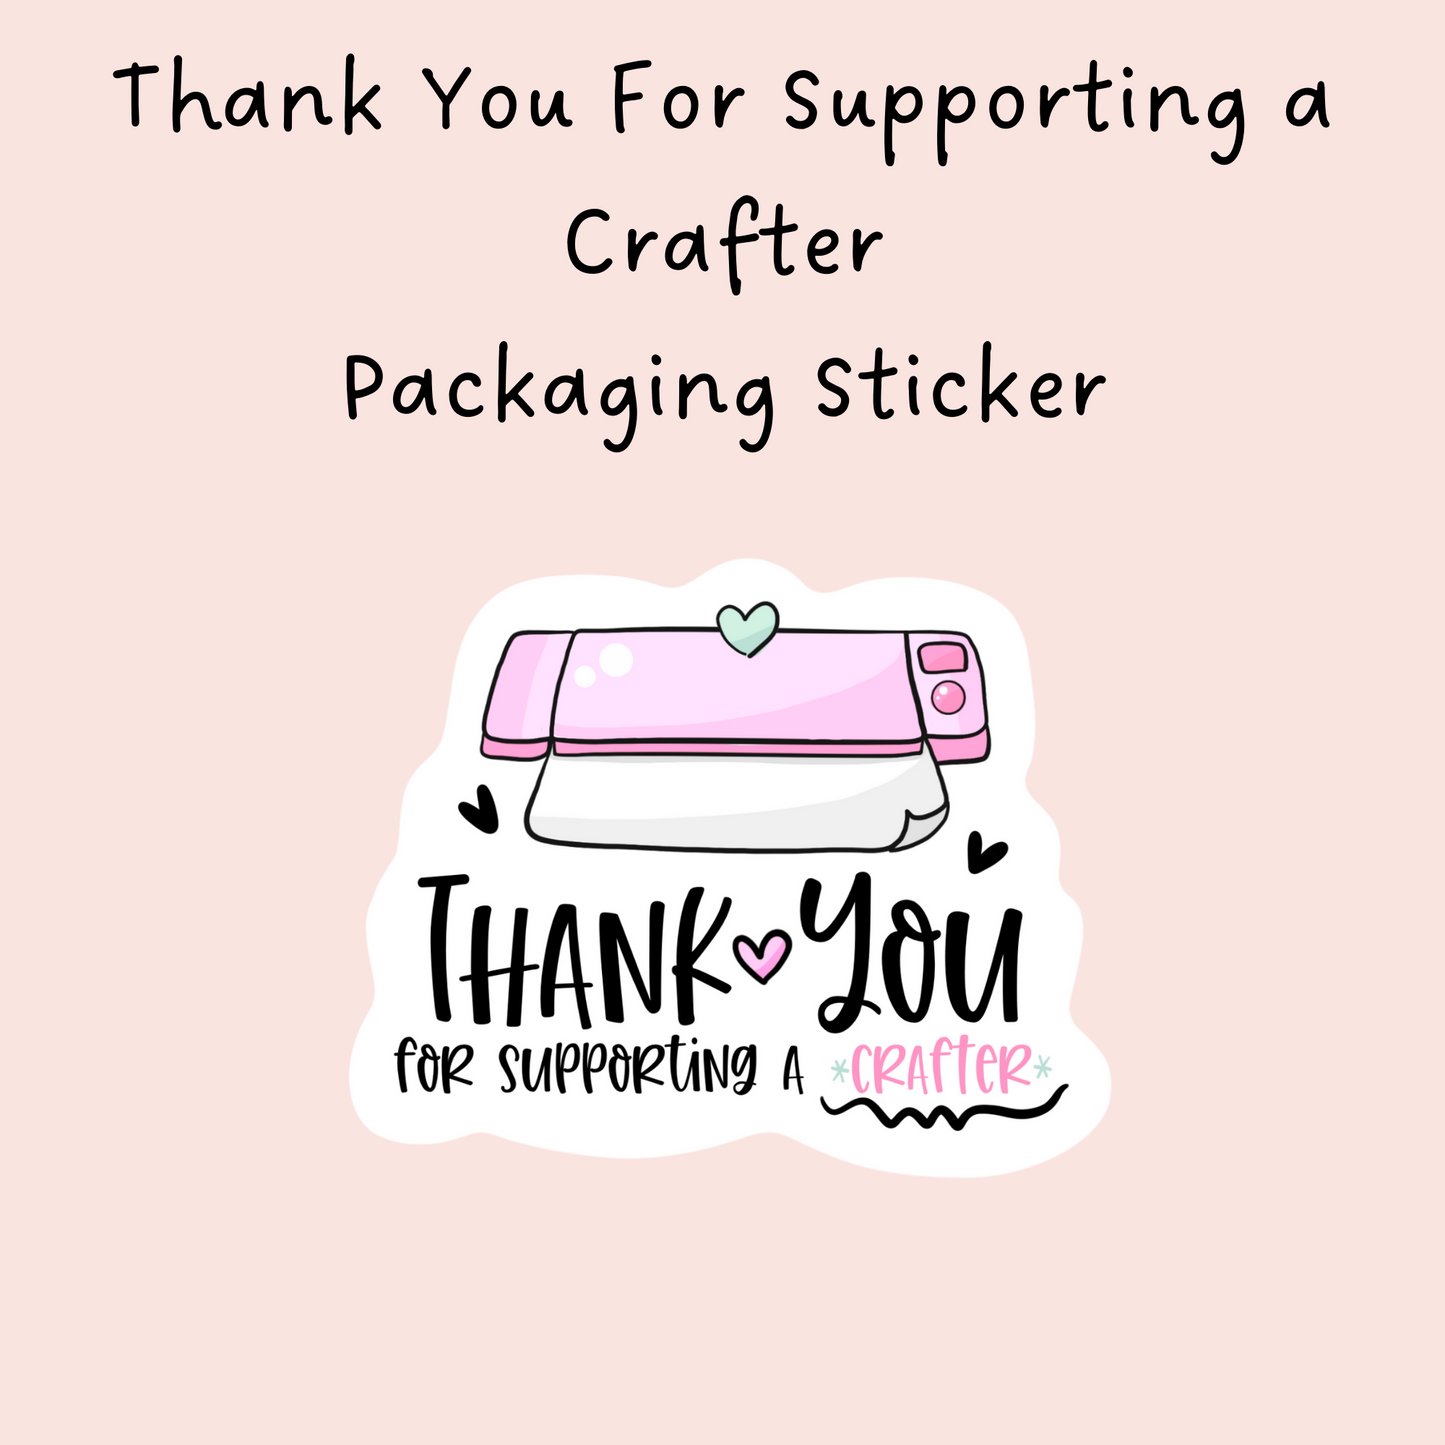 Thank You For Supporting a Crafter Packaging Sticker